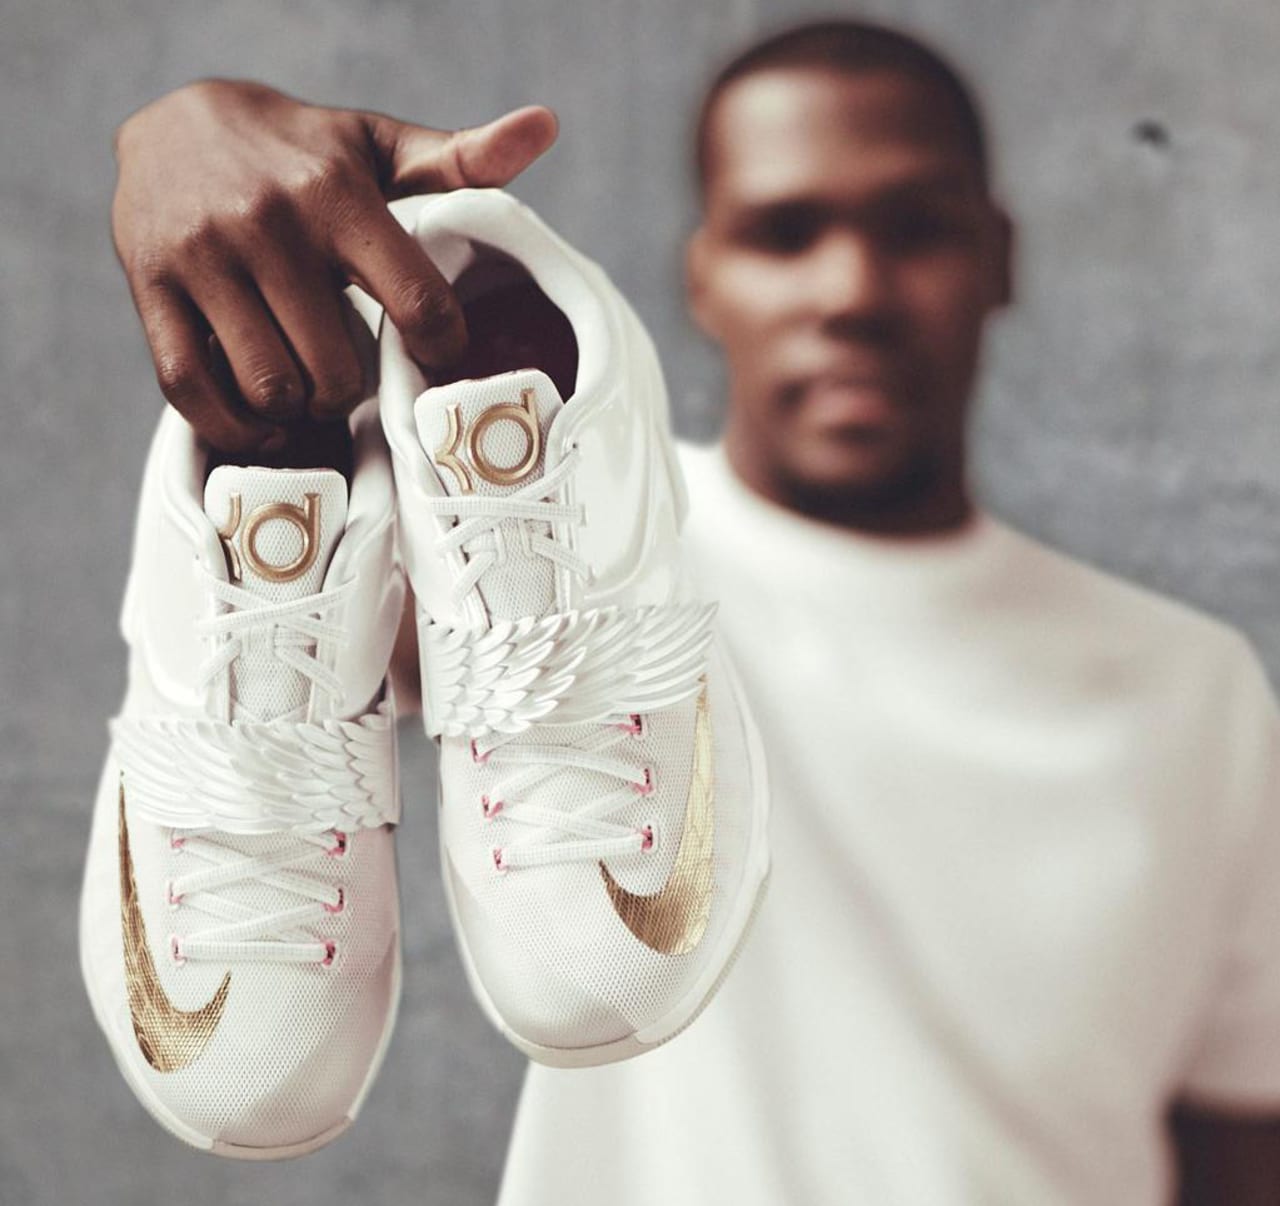 kevin durant aunt pearl 11